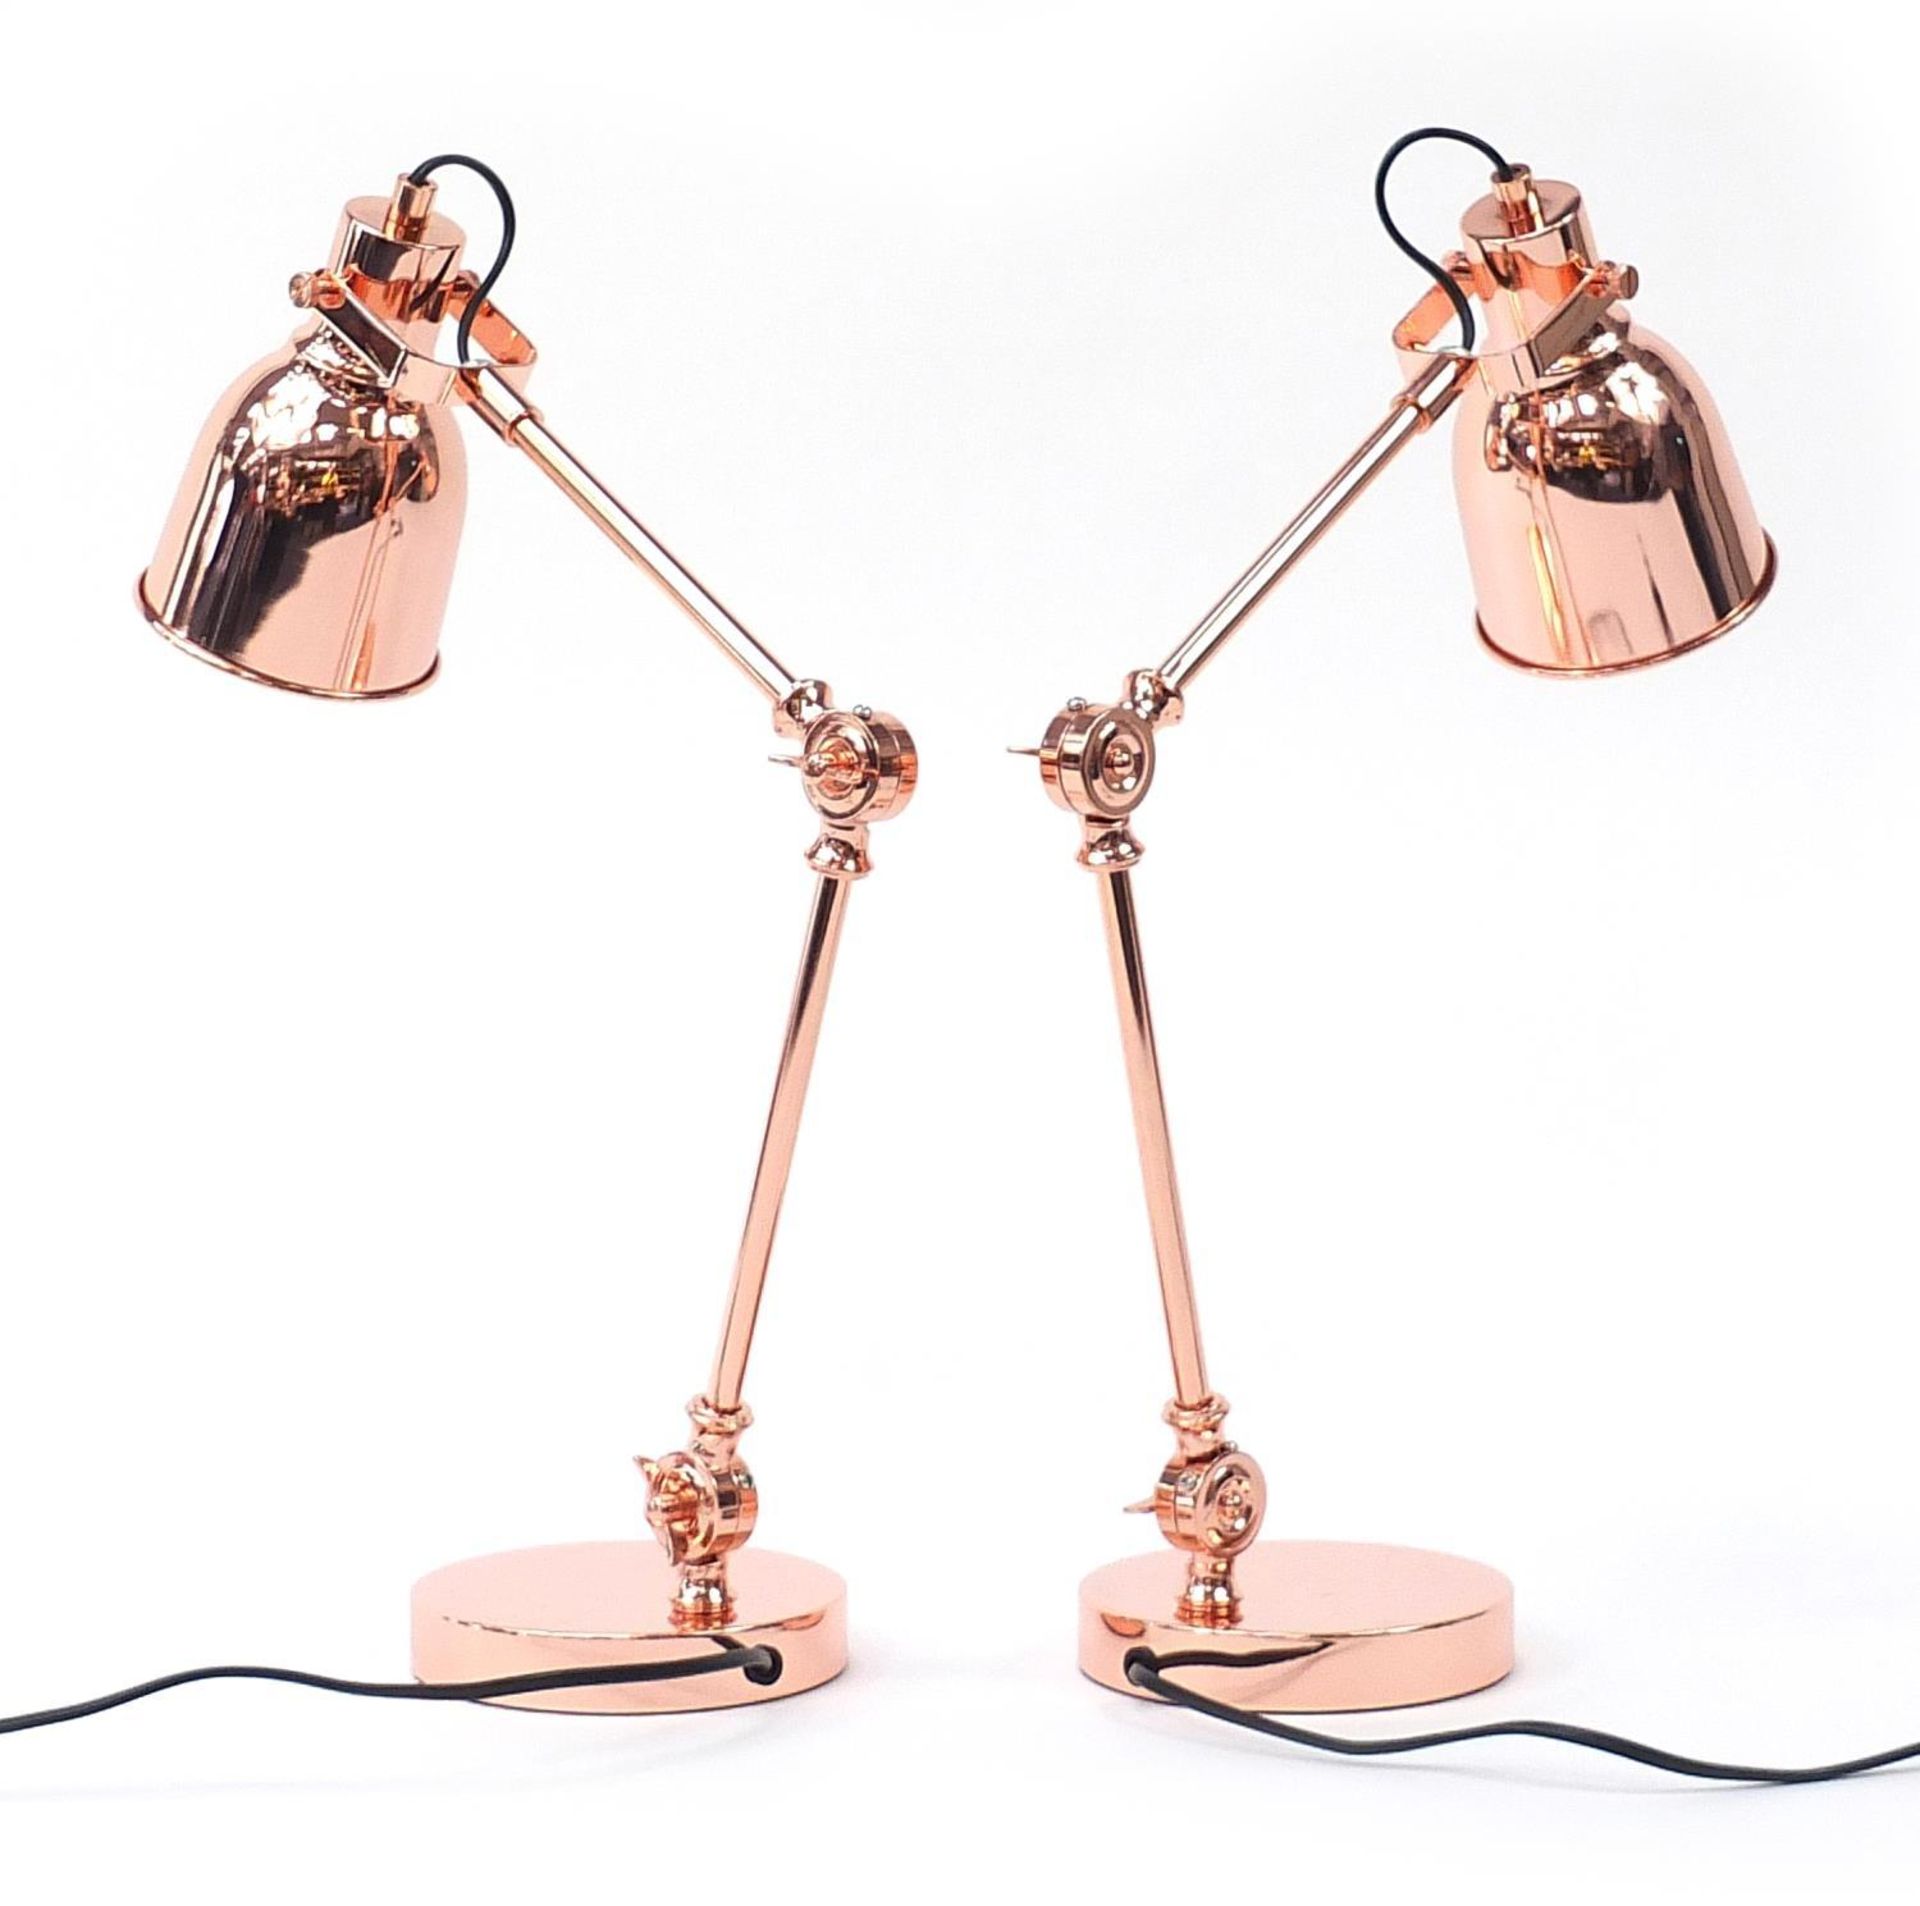 Pair of retro Anglepoise lamps : - Image 2 of 3